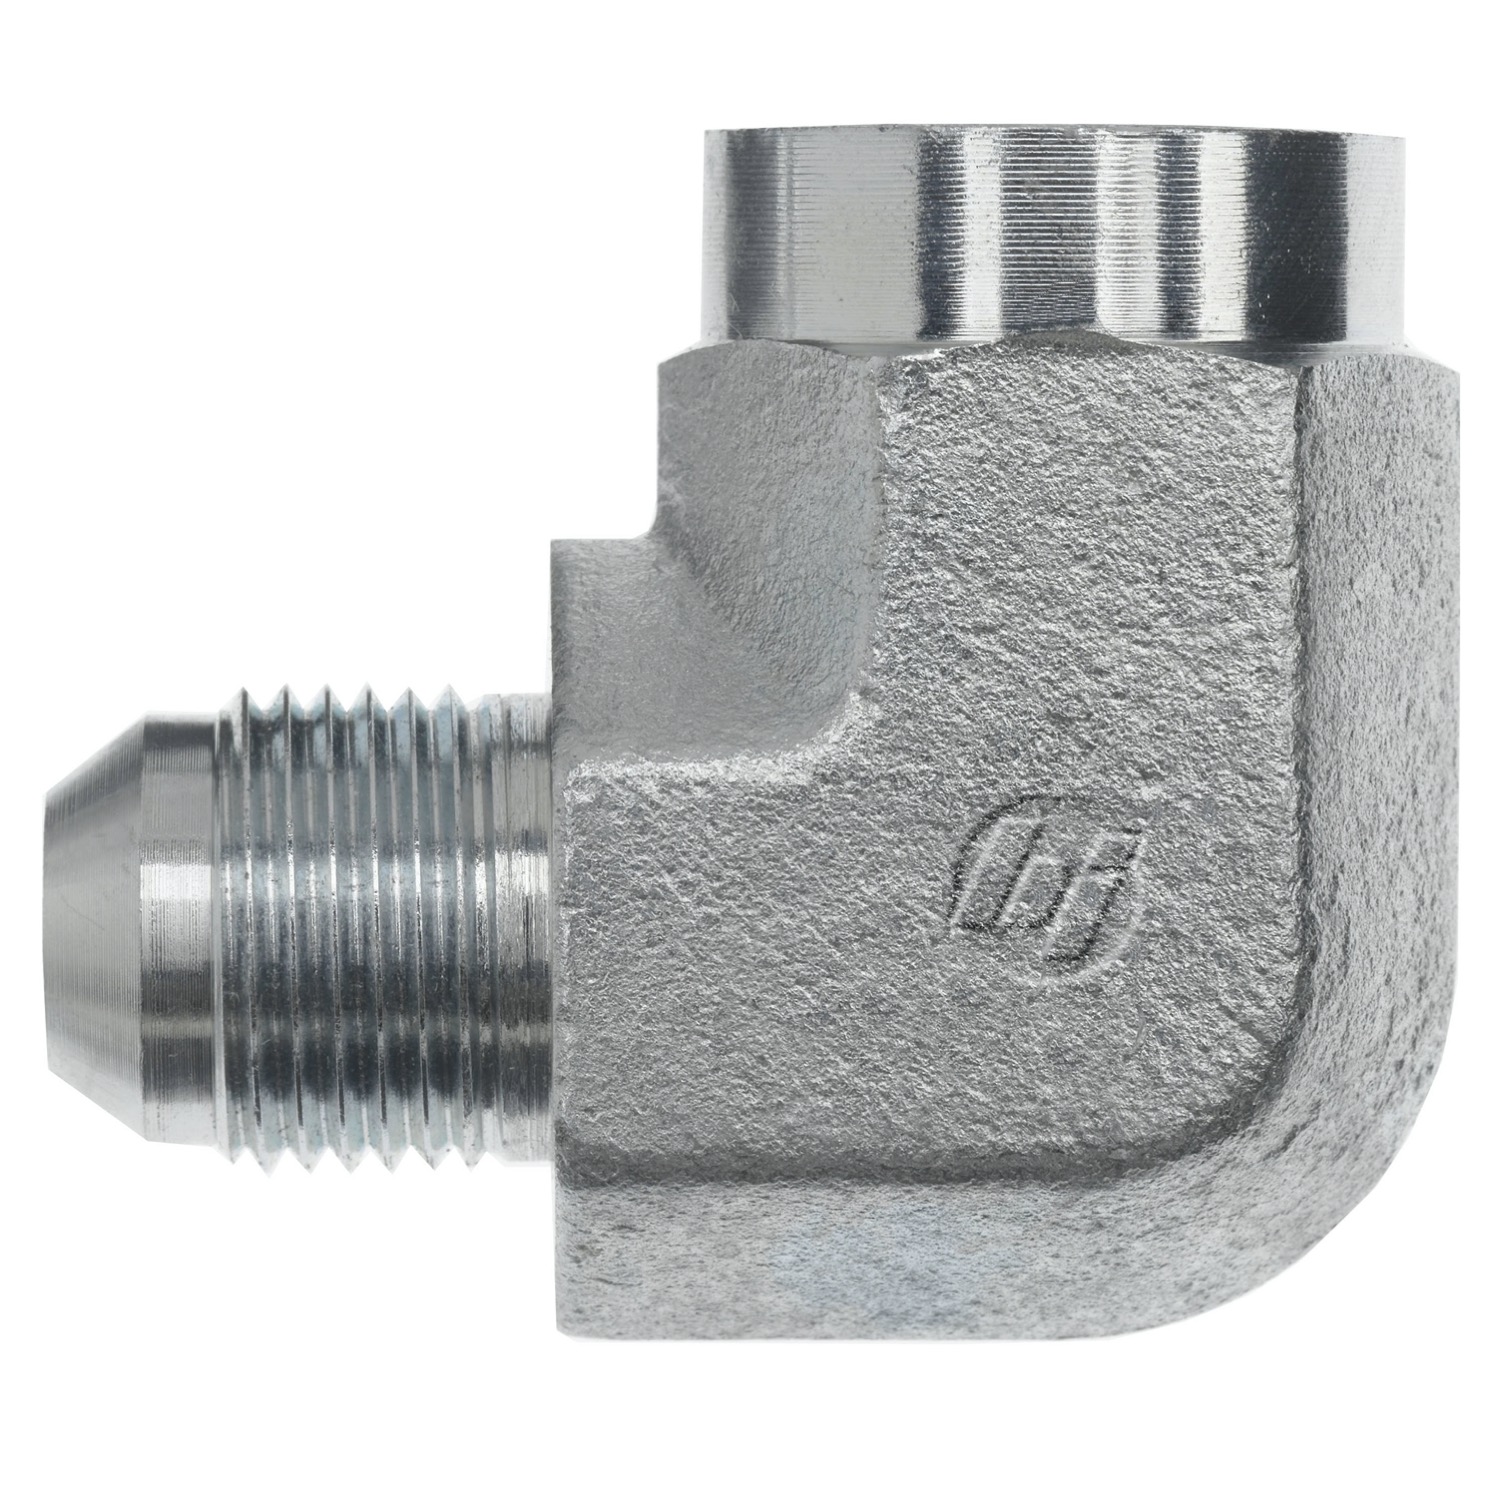 Hydraulic Hose Adapters - Elbow 90° Fitting, JIC 37° Flare to NPTF- 2502 Series 2502-12-12-FG